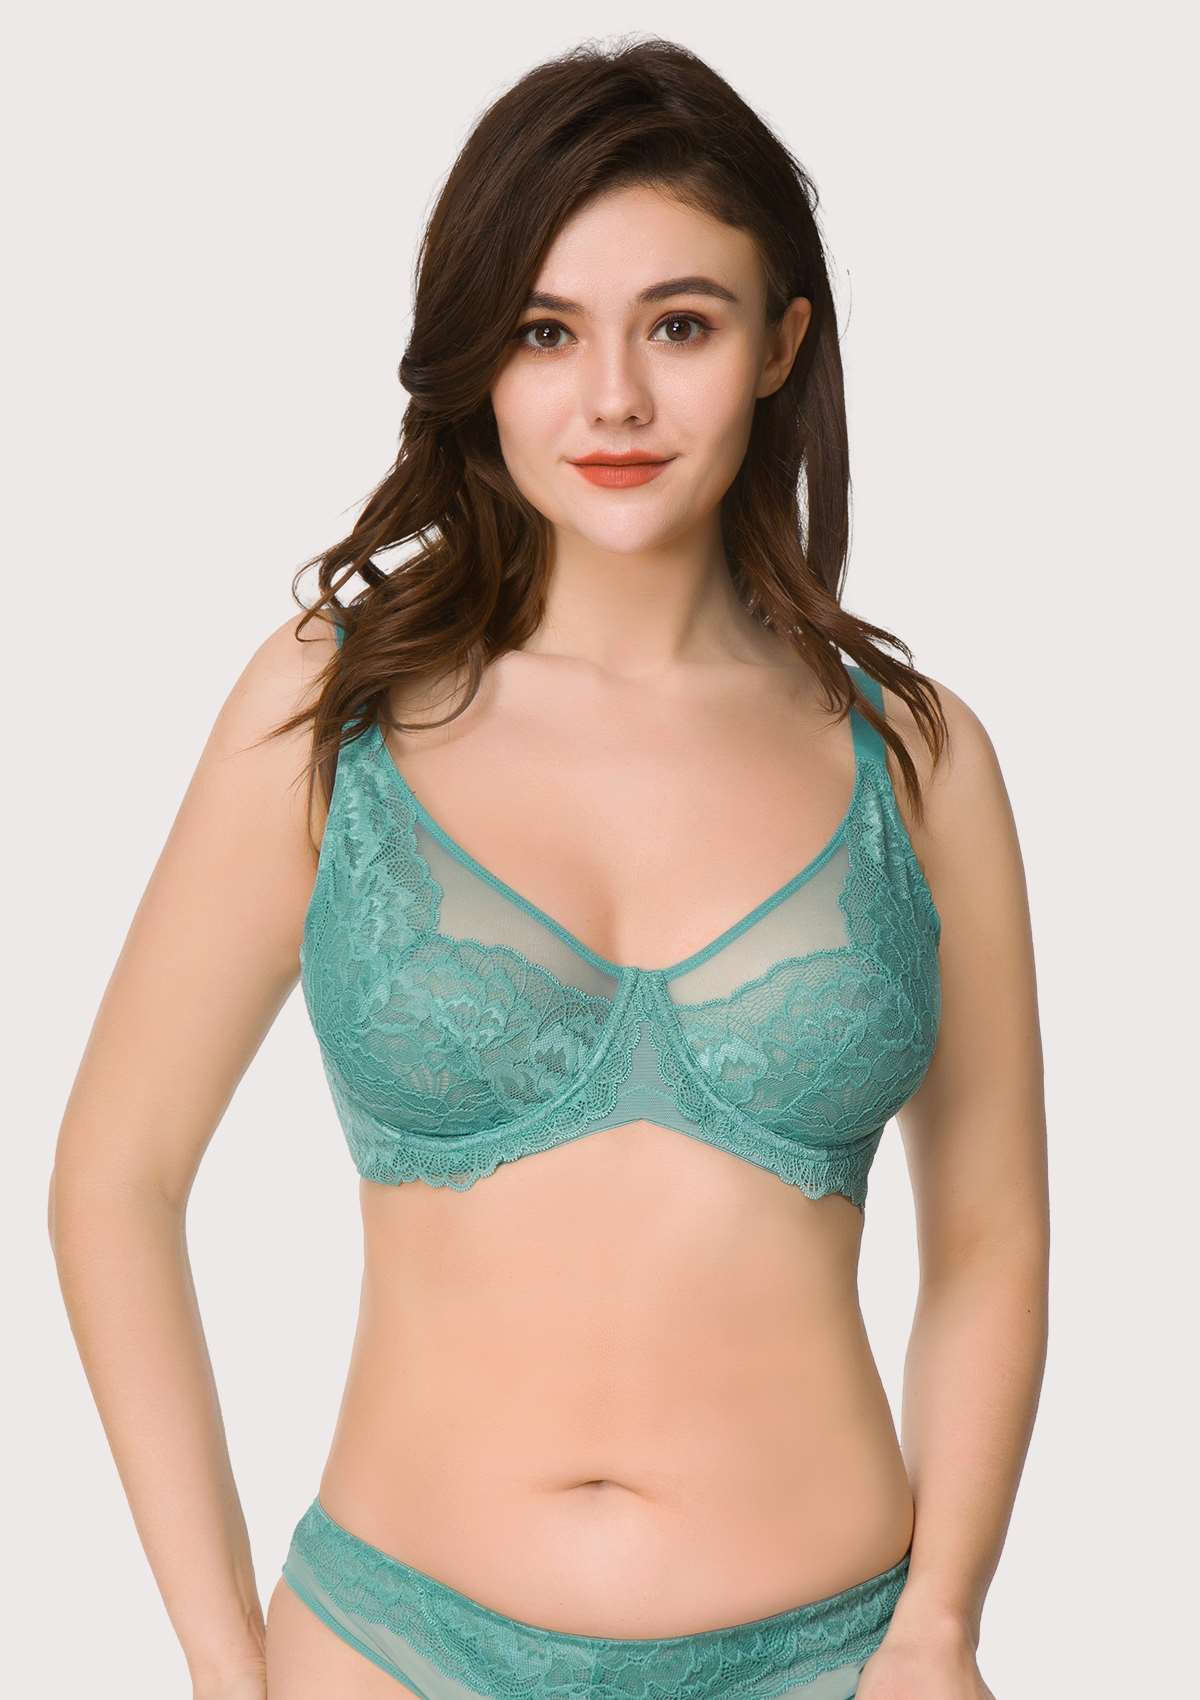 HSIA Peony Lace Unlined Supportive Underwire Bra - Light Coral / 34 / DDD/F